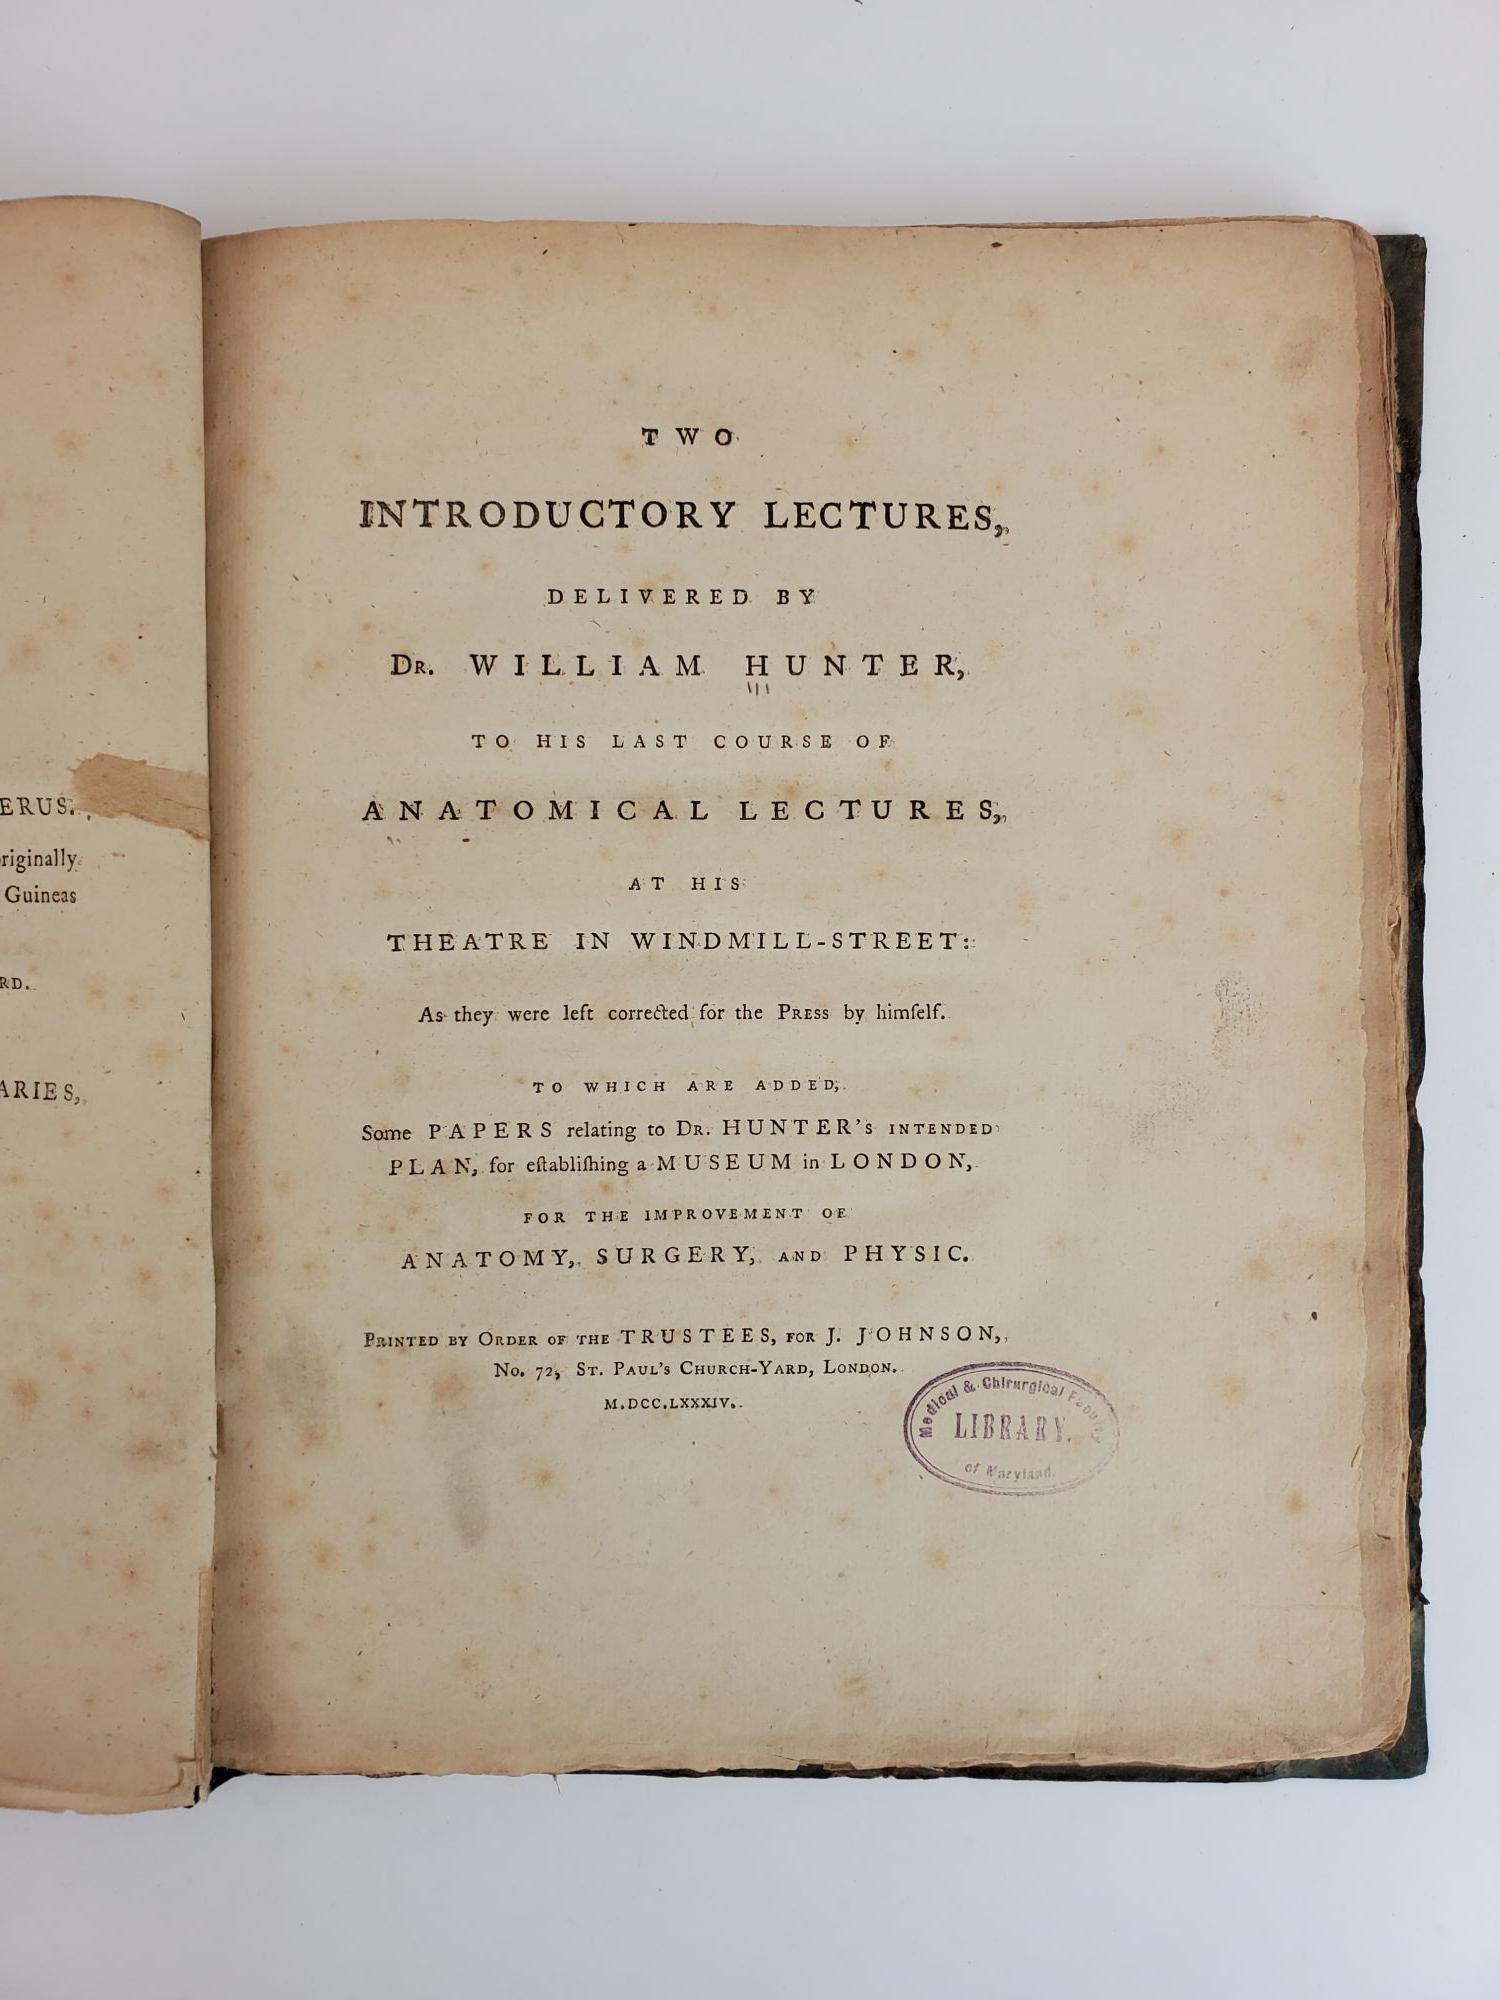 Product Image for TWO INTRODUCTORY LECTURES, DELIVERED BY DR. WILLIAM HUNTER, TO HIS LAST COURSE OF ANATOMICAL LECTURES, AT HIS THEATRE IN WINDMILL-STREET